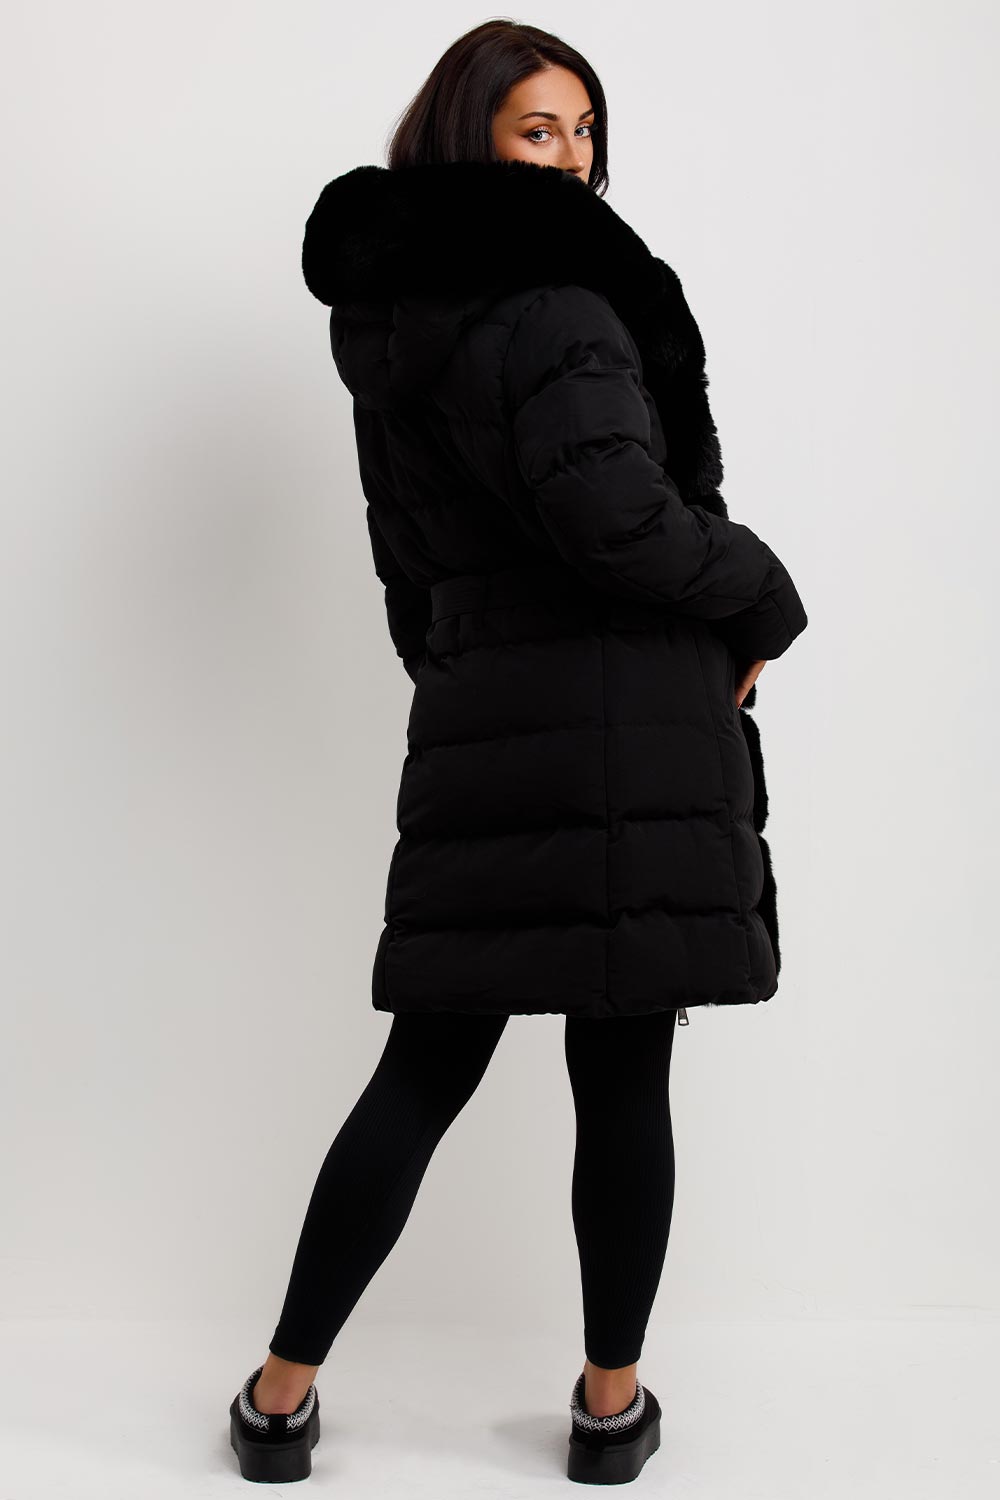 Women's Black Long Puffer Padded Coat With Faux Fur Hood And Trim ...